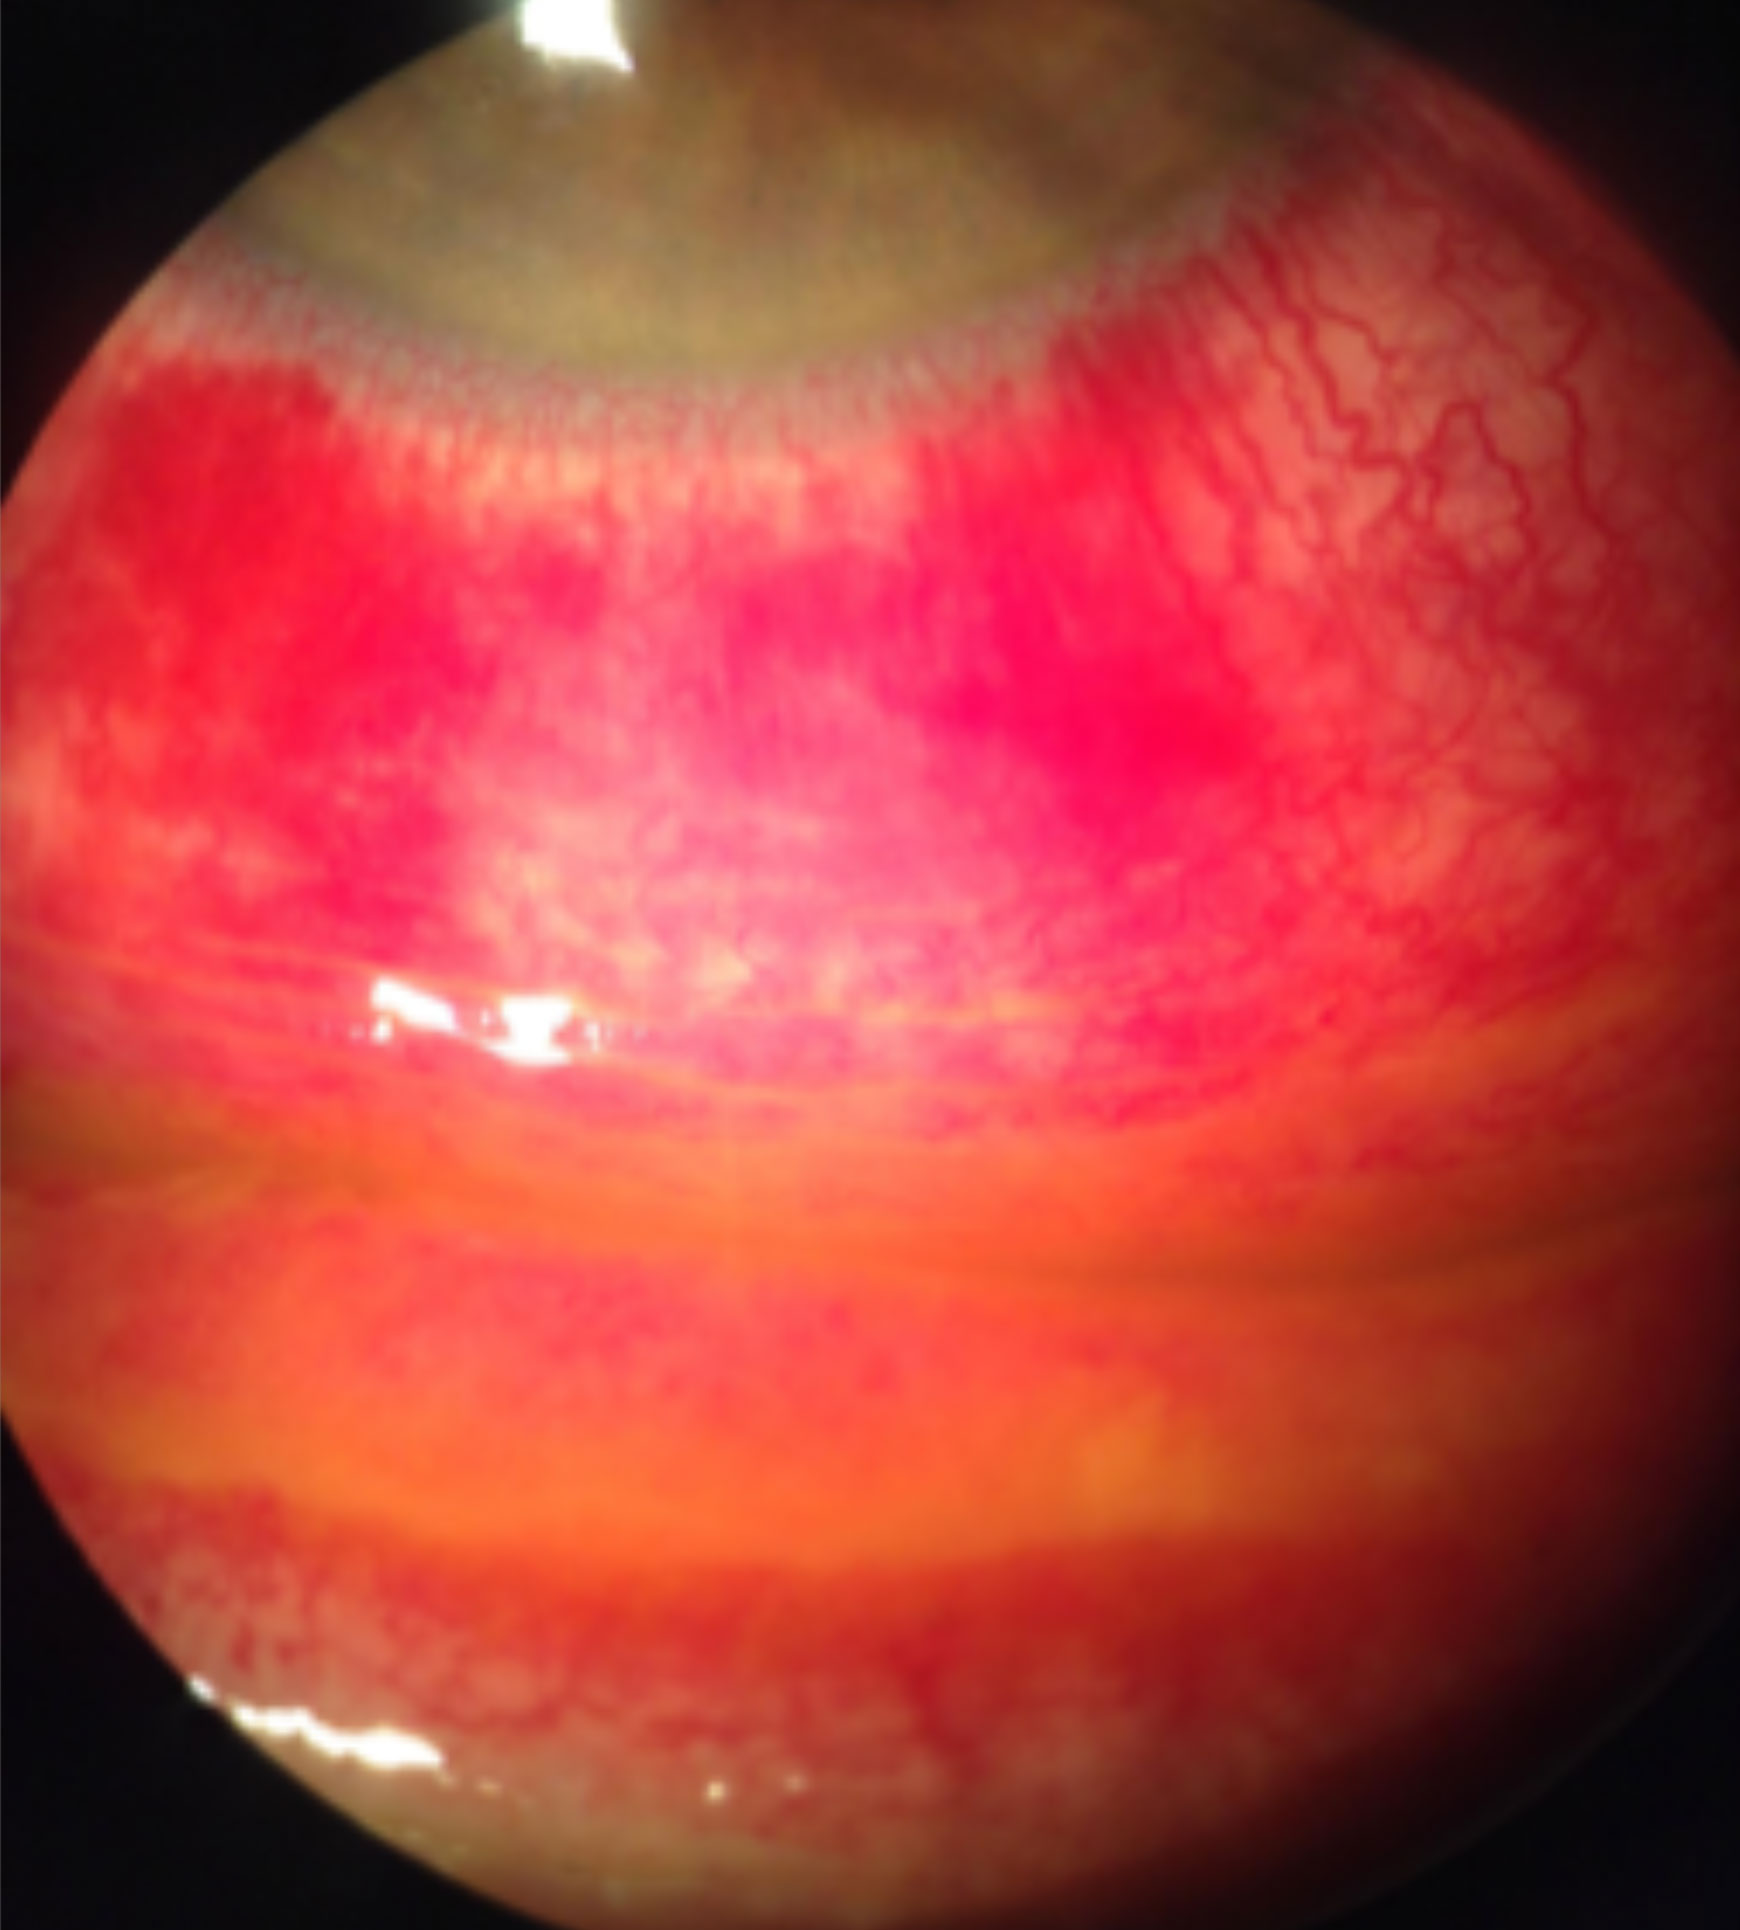 Staining with fluorescein sodium reveals diffuse conjunctival hyperemia associated with a viral infection causing severe inflammation, subconjunctival hemorrhages and pseudomembranes.